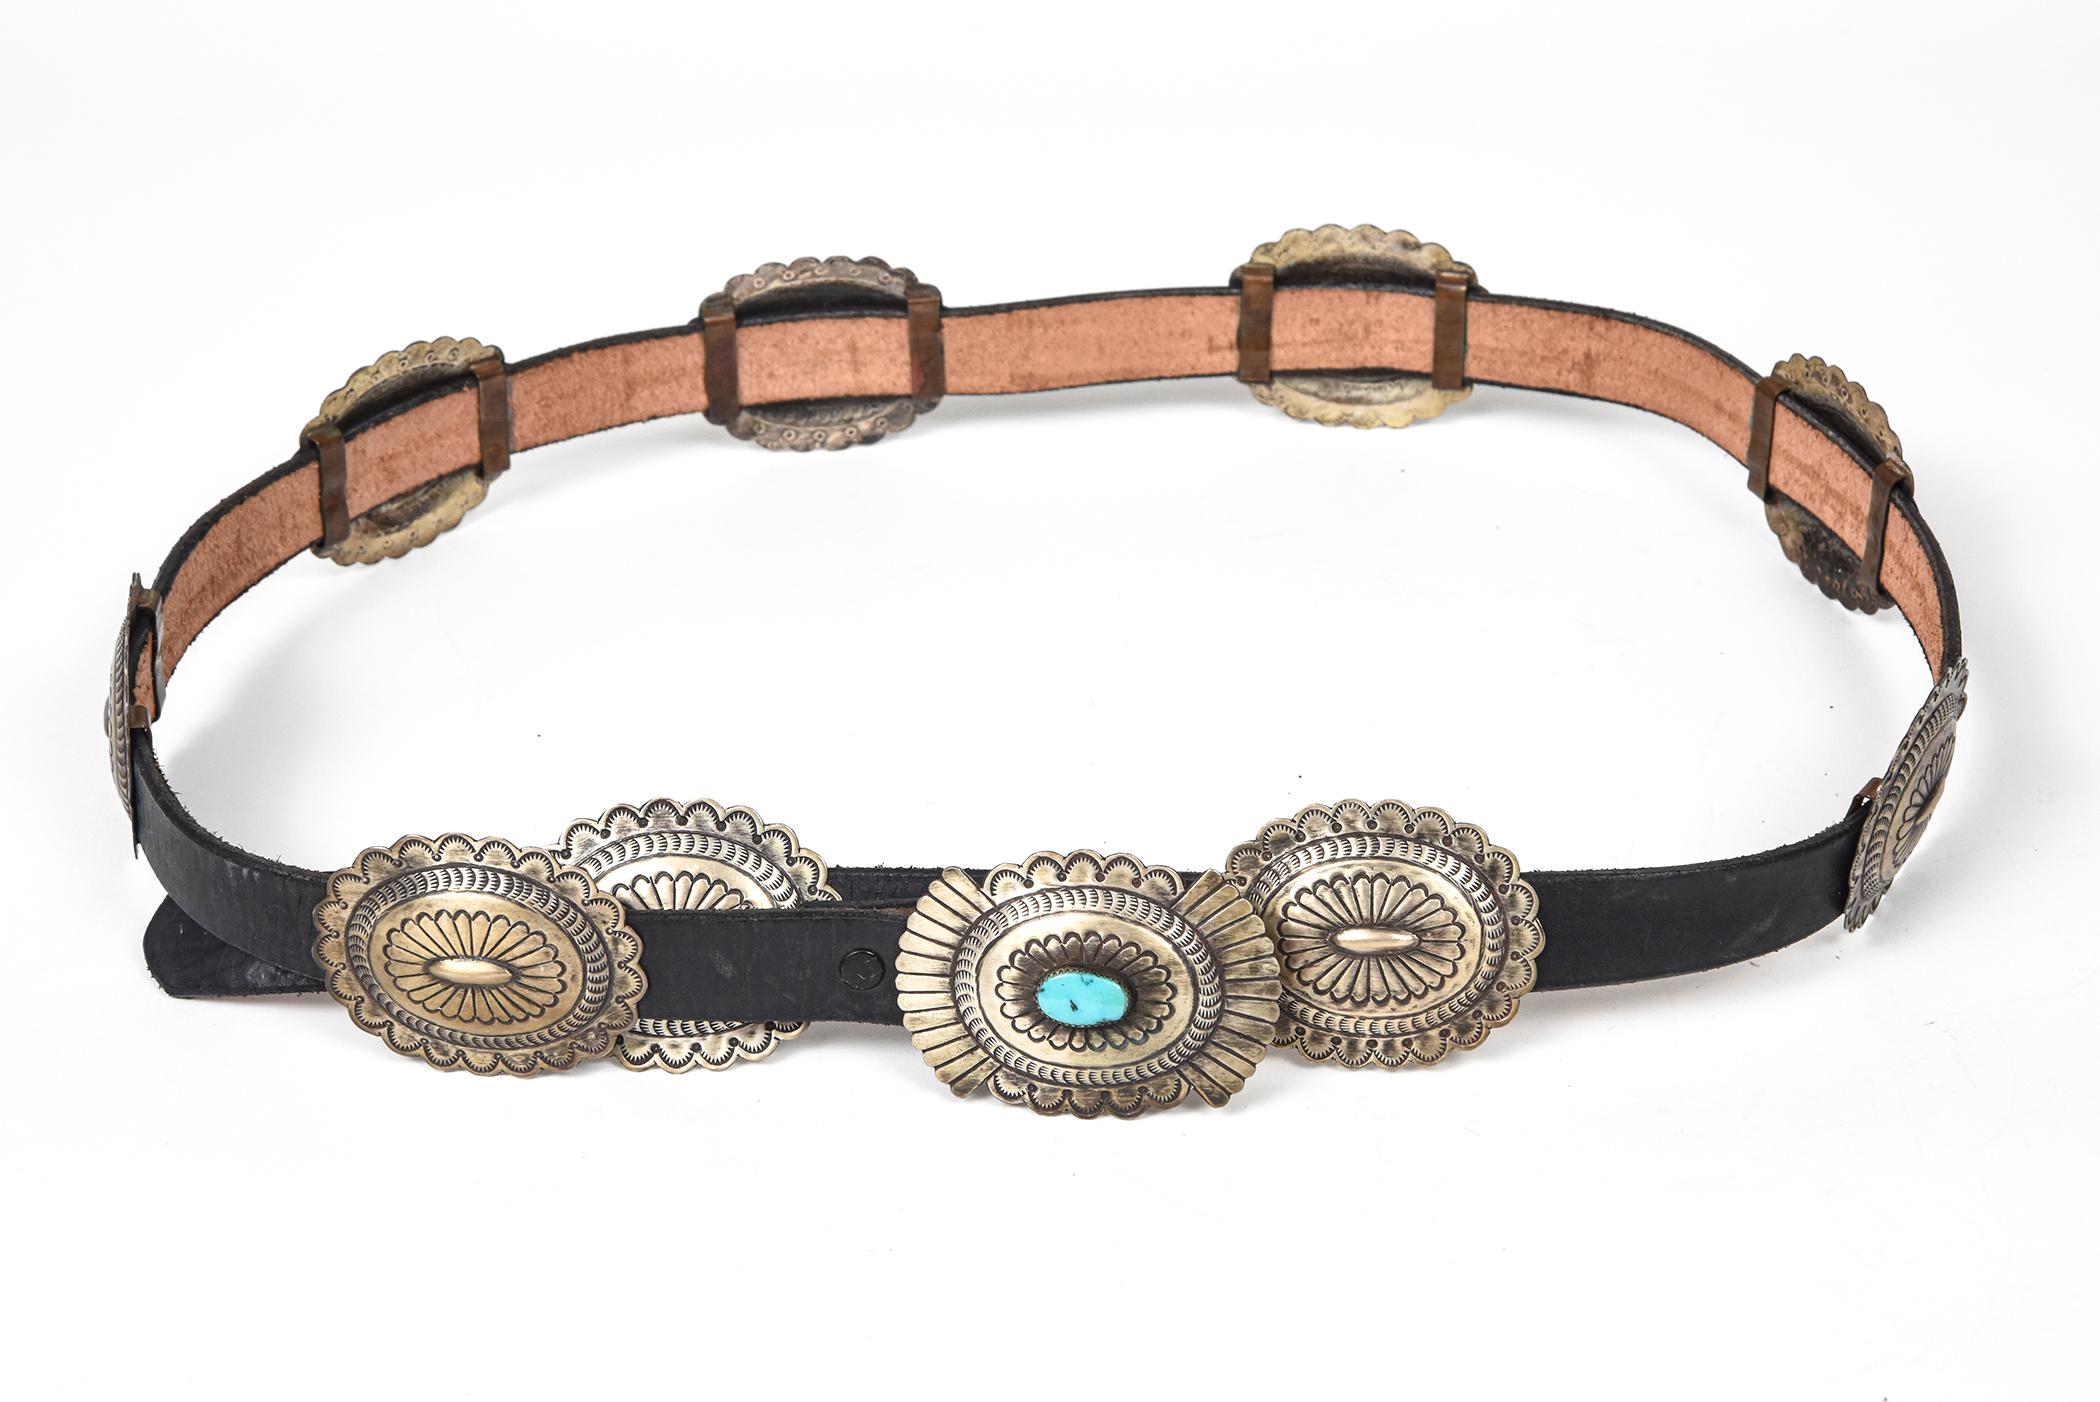 This beautiful handmade Concho belt was purchased in 1990 and never worn.  It features 9 sterling silver oval stylized conchos each measuring 2.5″ x 2″ and a matching buckle with a centrally set oval cabochon turquoise.  The buckle measures 2.80